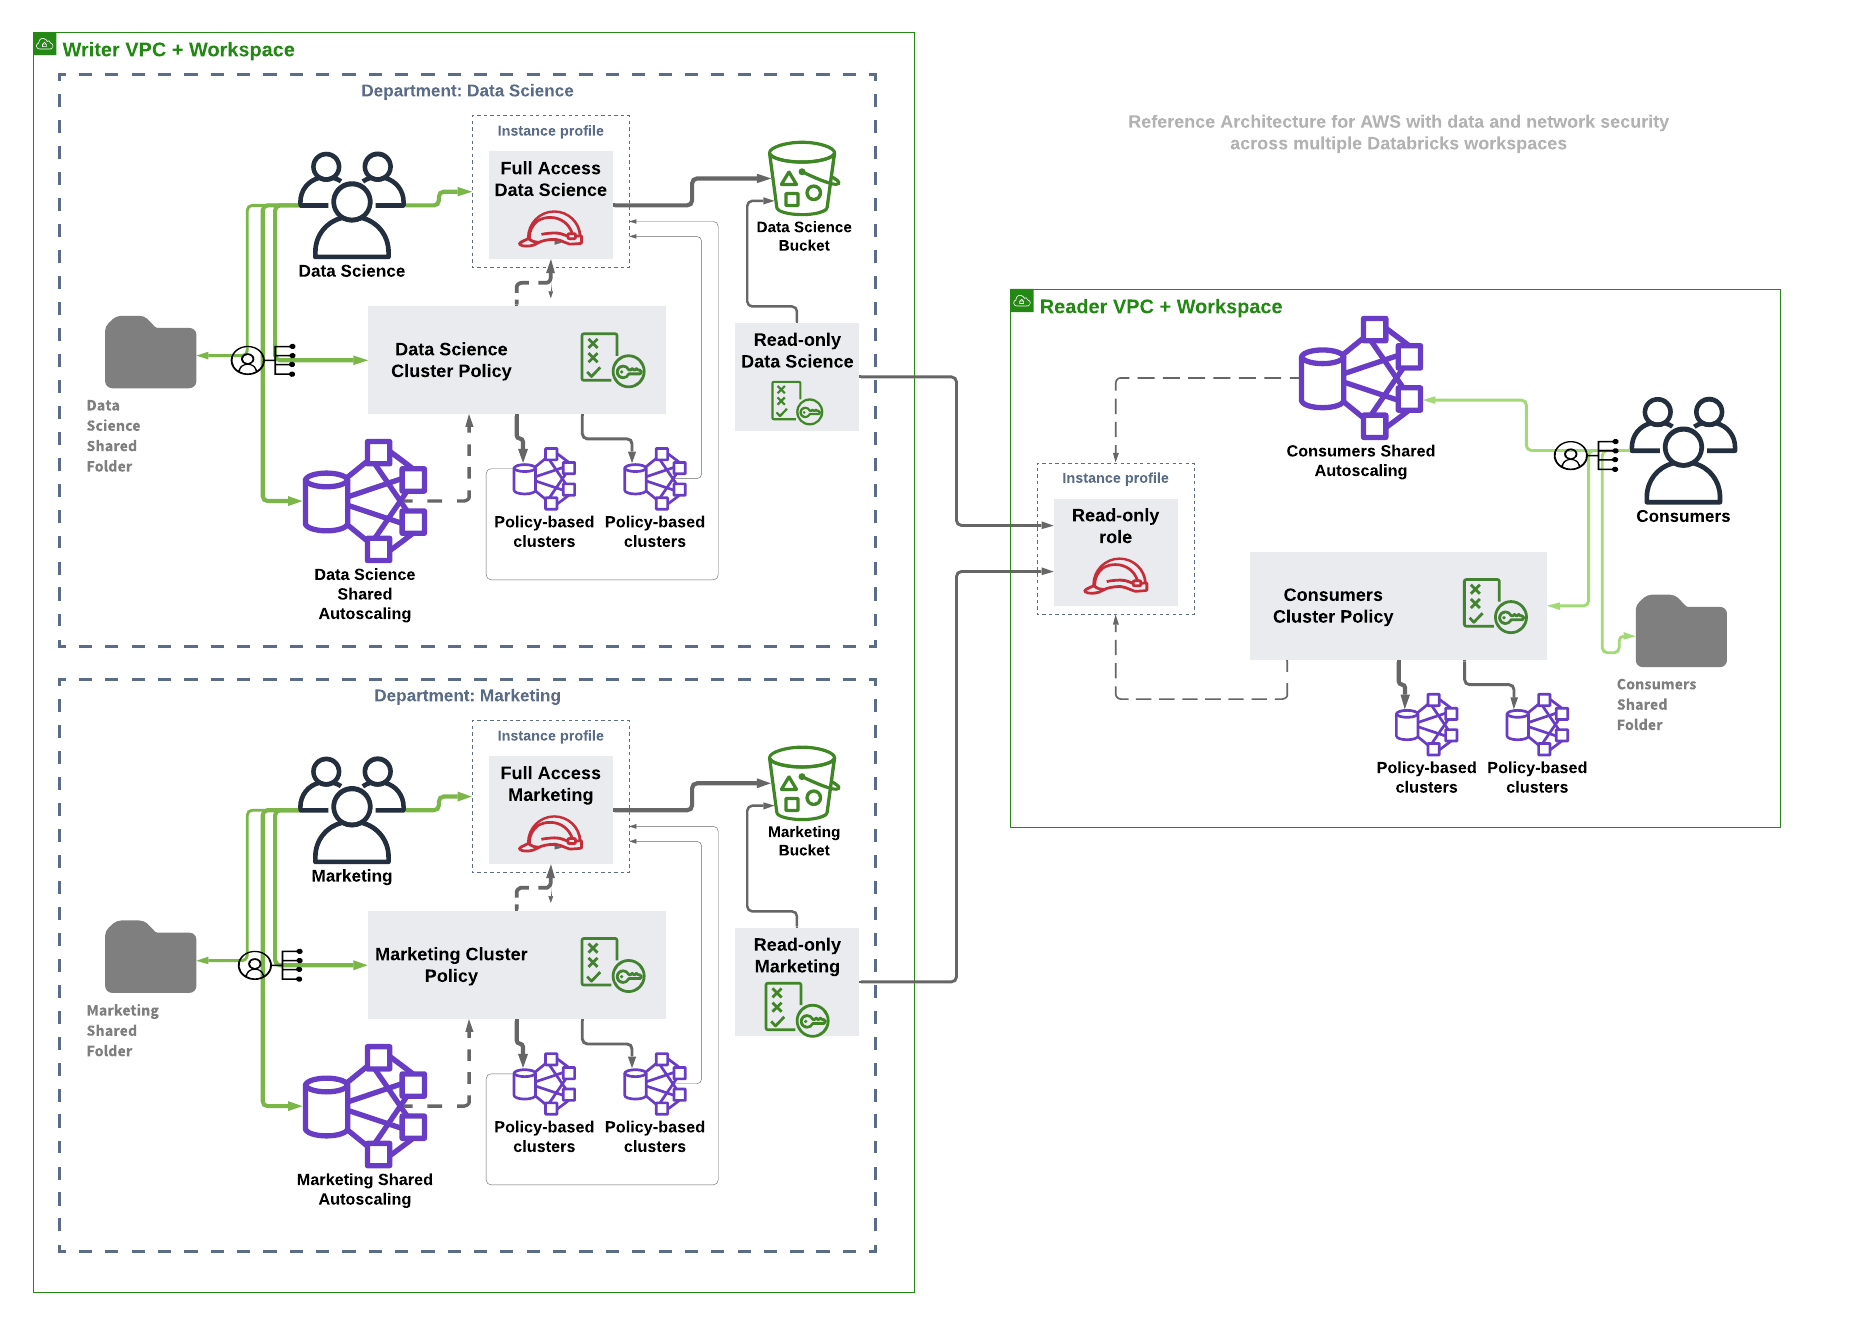 Reference Architecture for AWS with data and network security across multiple Databricks workspaces